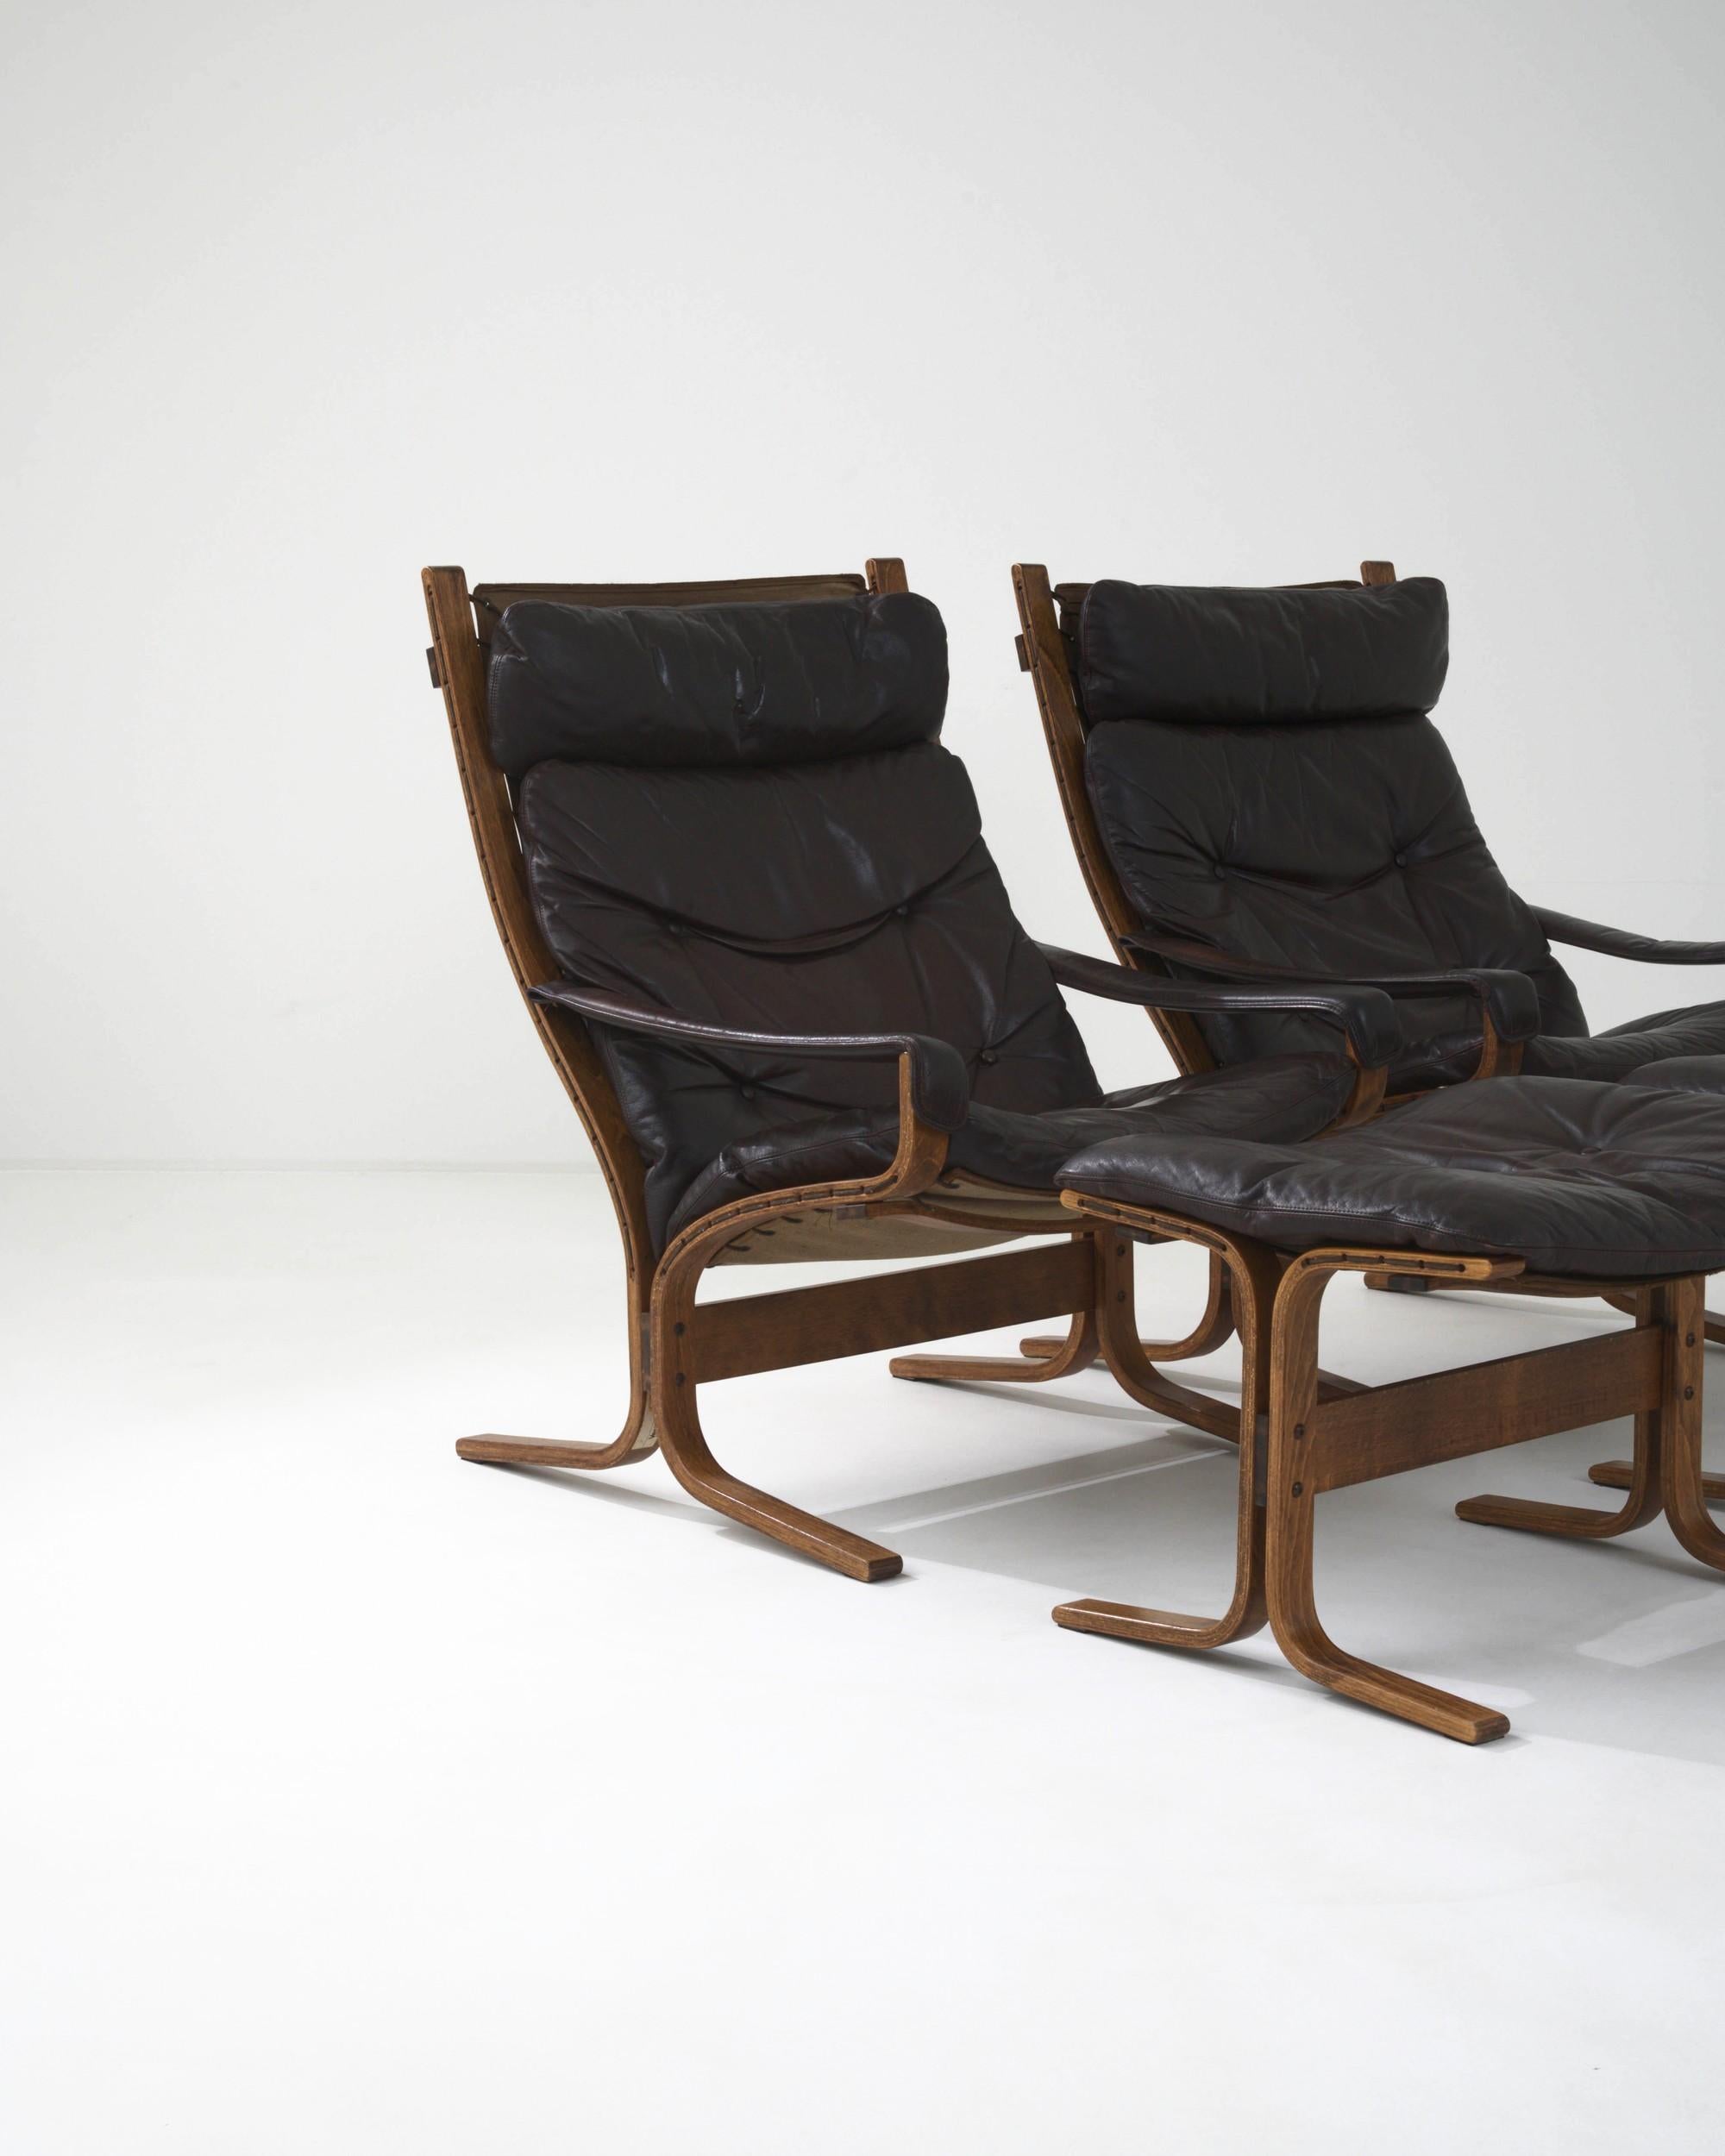 “Siesta” Armchairs with Ottomans by I. Relling, a Pair 1